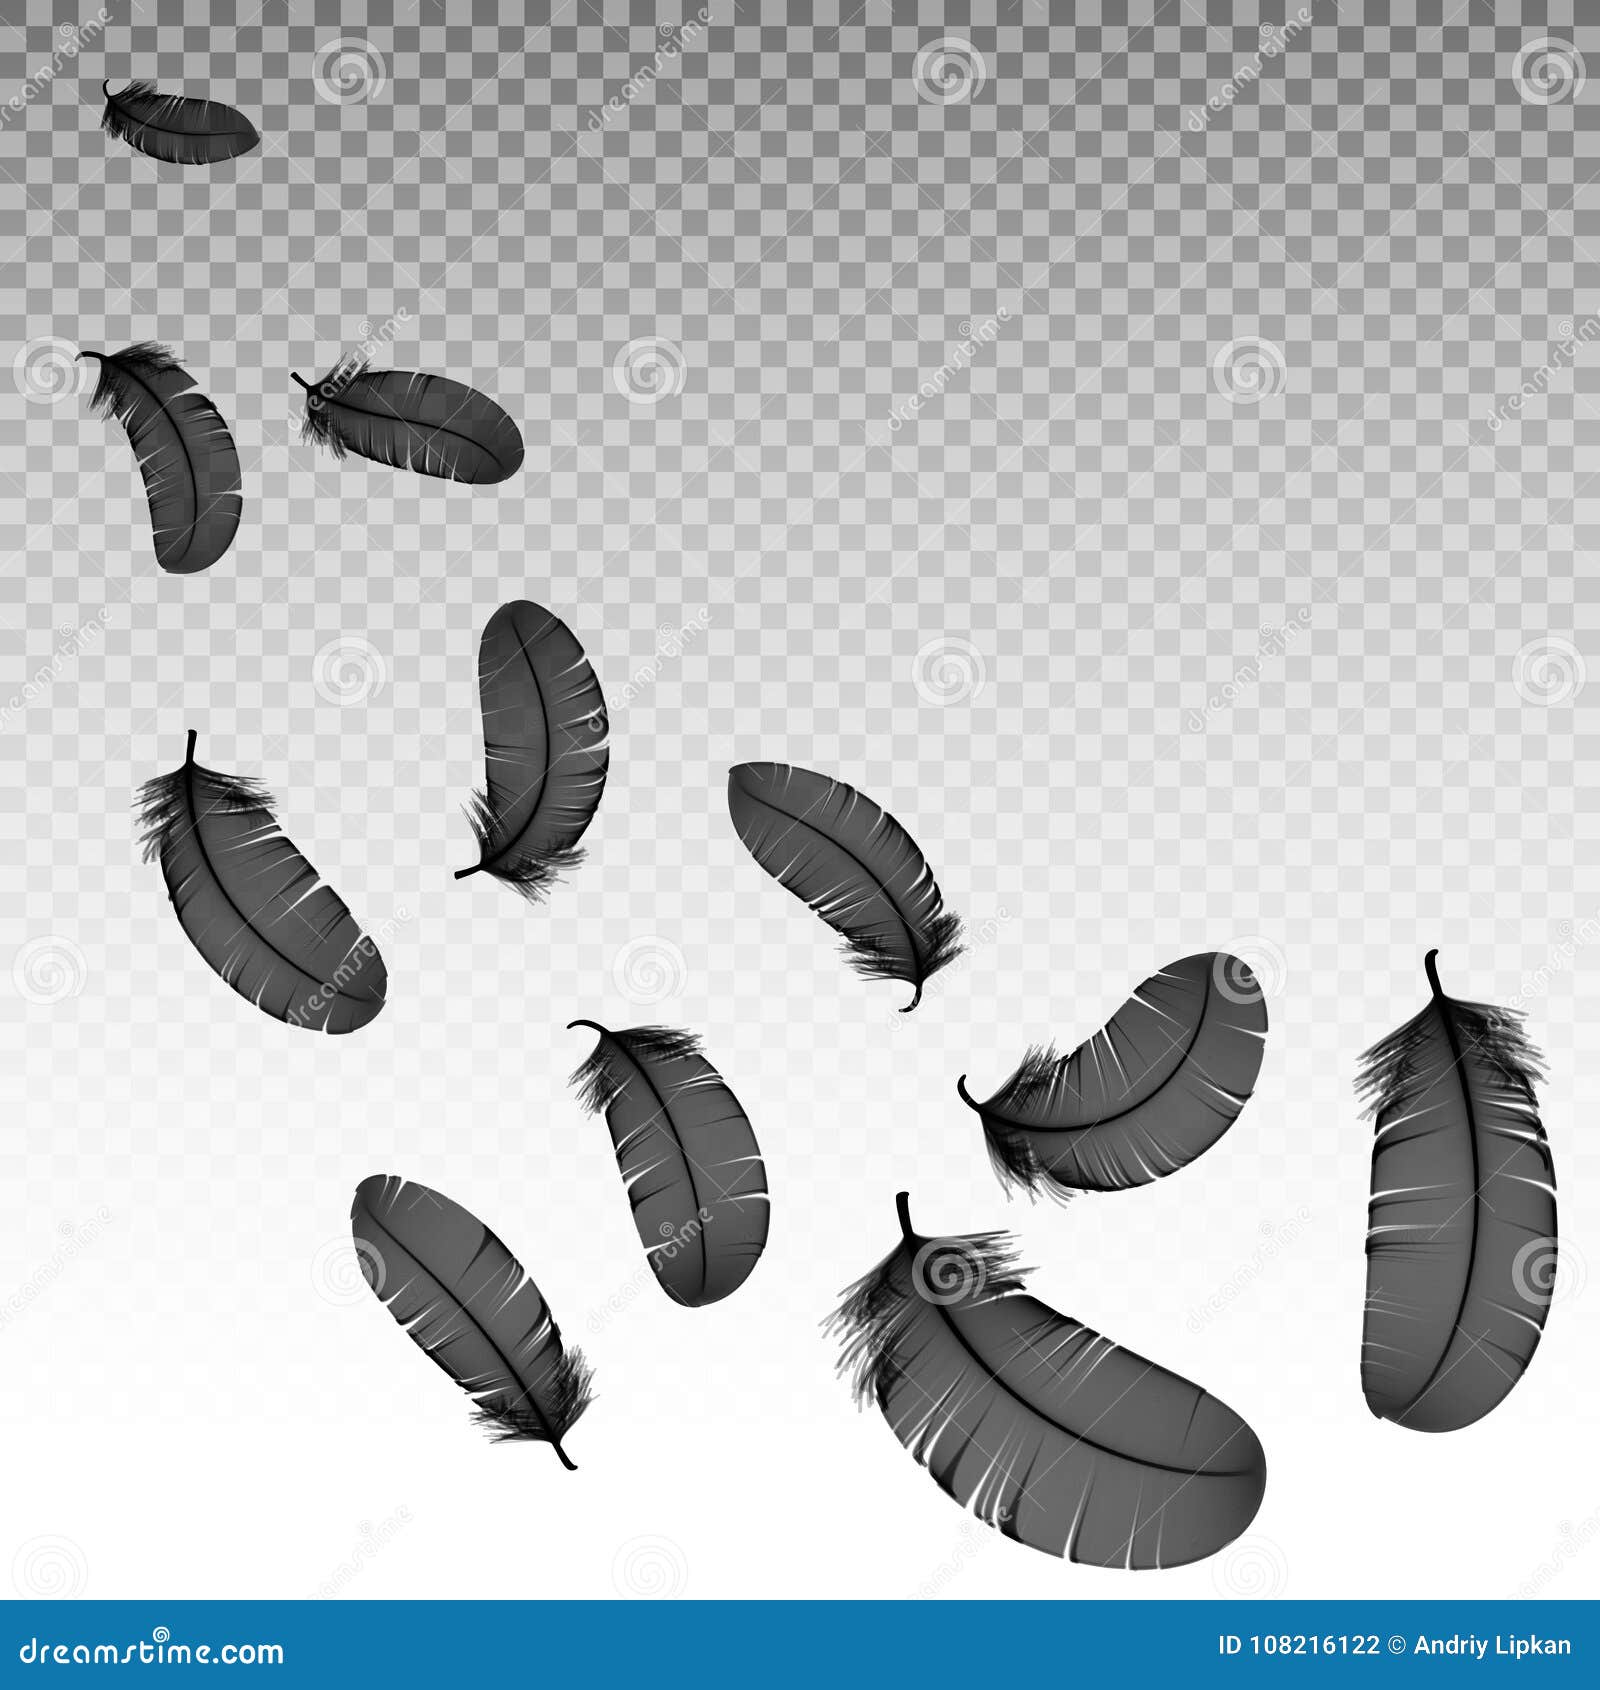 Black Feather Silhouette PNG Images, Black Feather Illustration, Three  Dimensional, Animal, Peacock PNG Image For Free Download